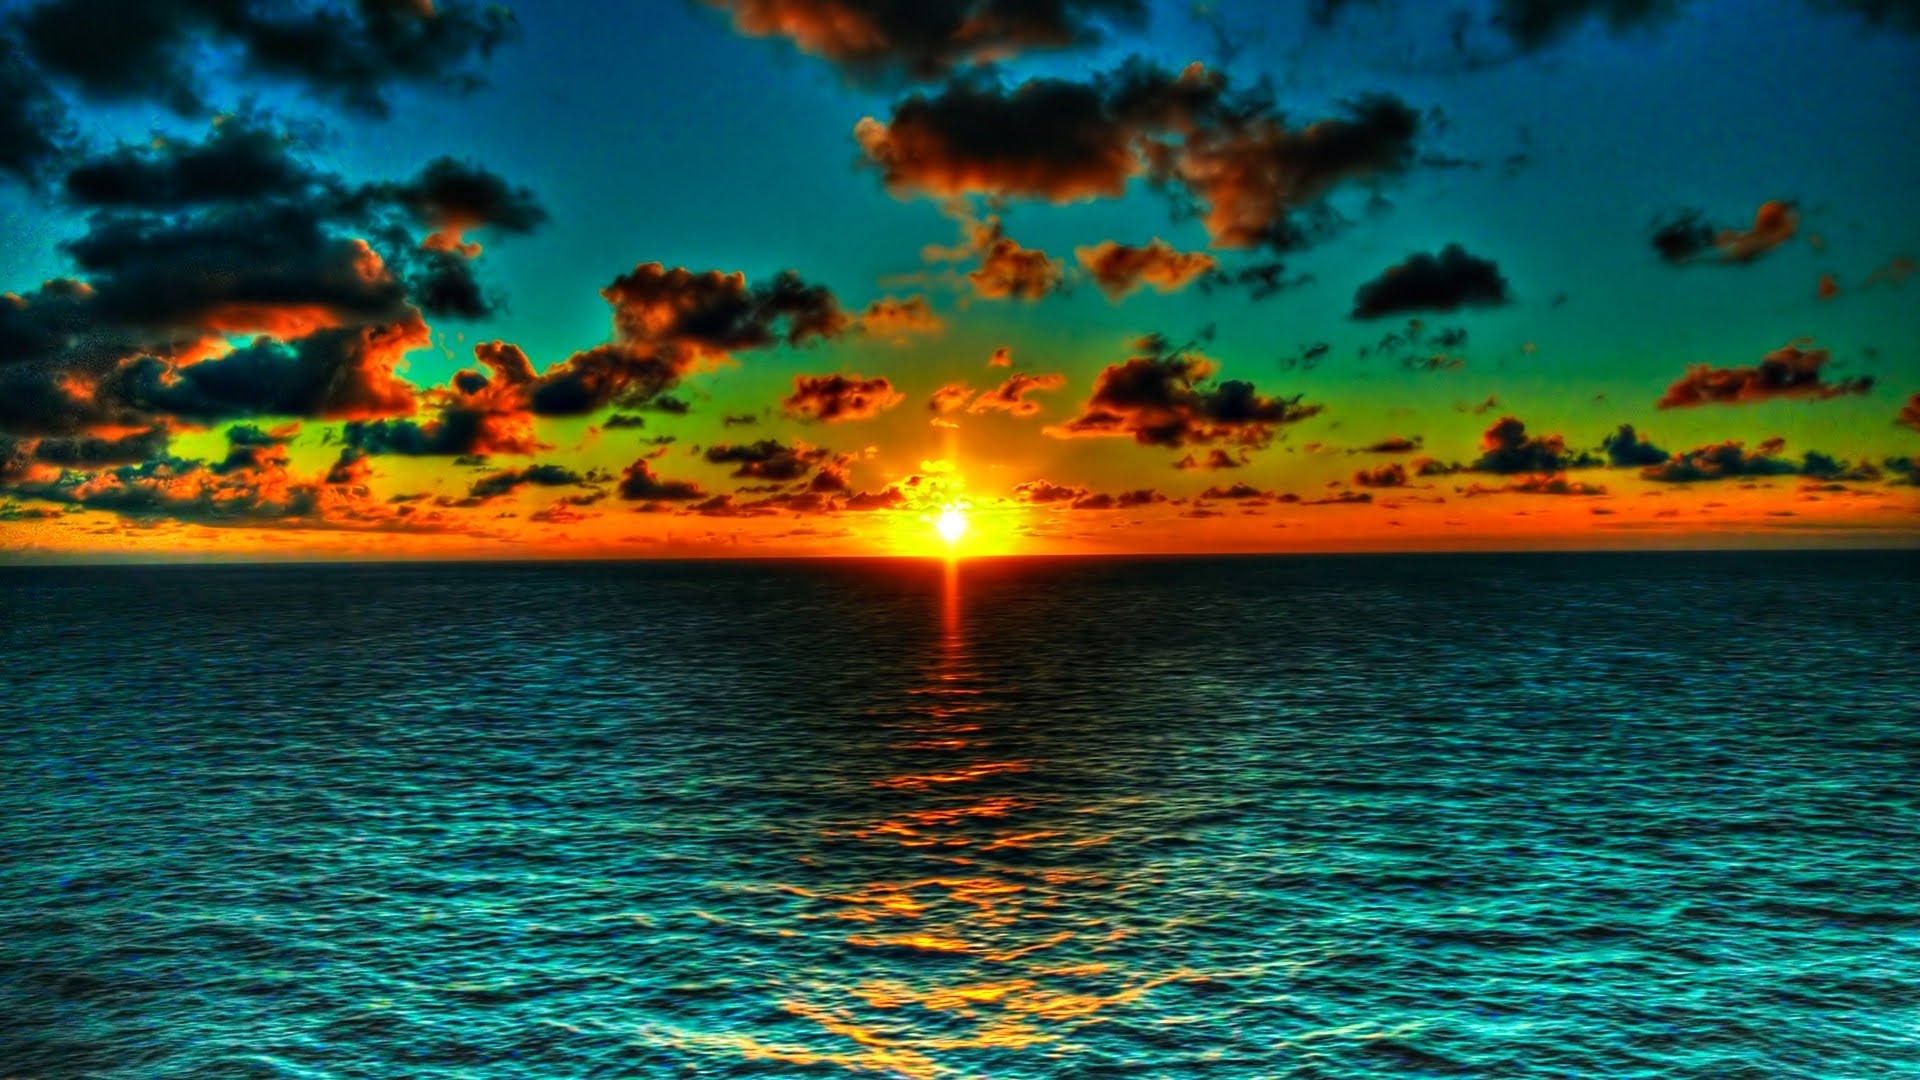 AMAZING !! Sunset over the Ocean (Wondeful Chill Out Music) - YouTube